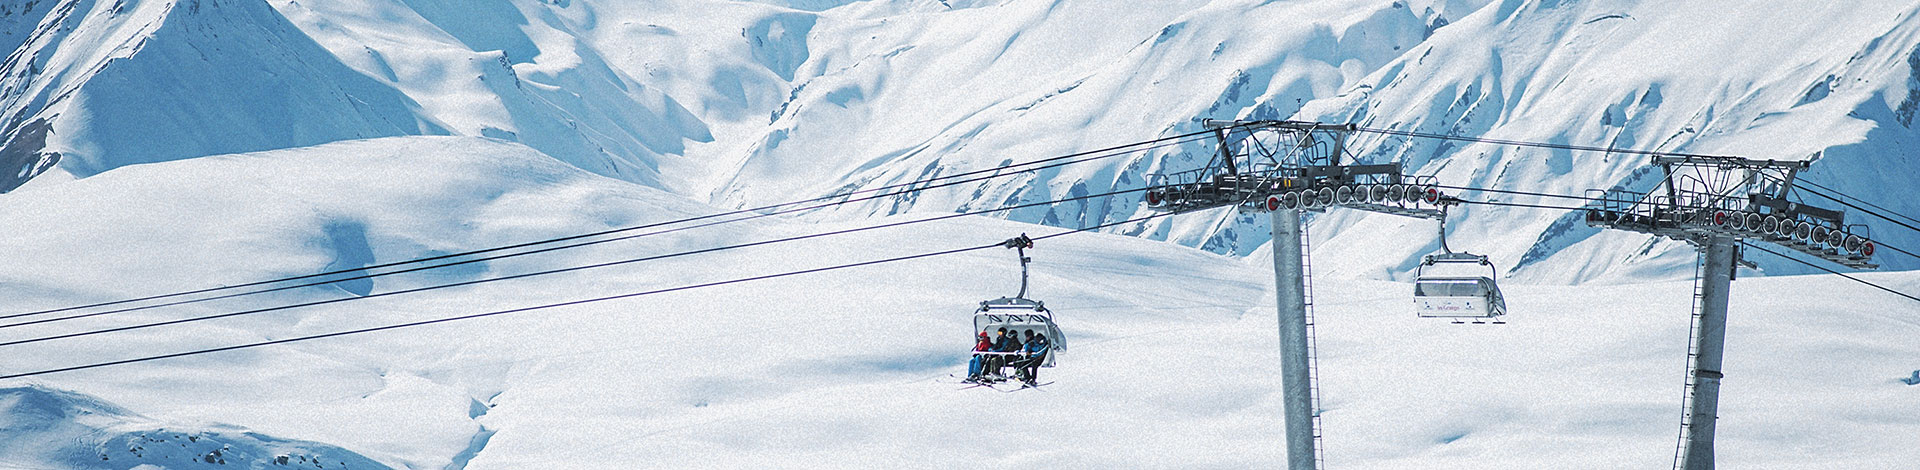 Chairlift in Les Menuires ski area